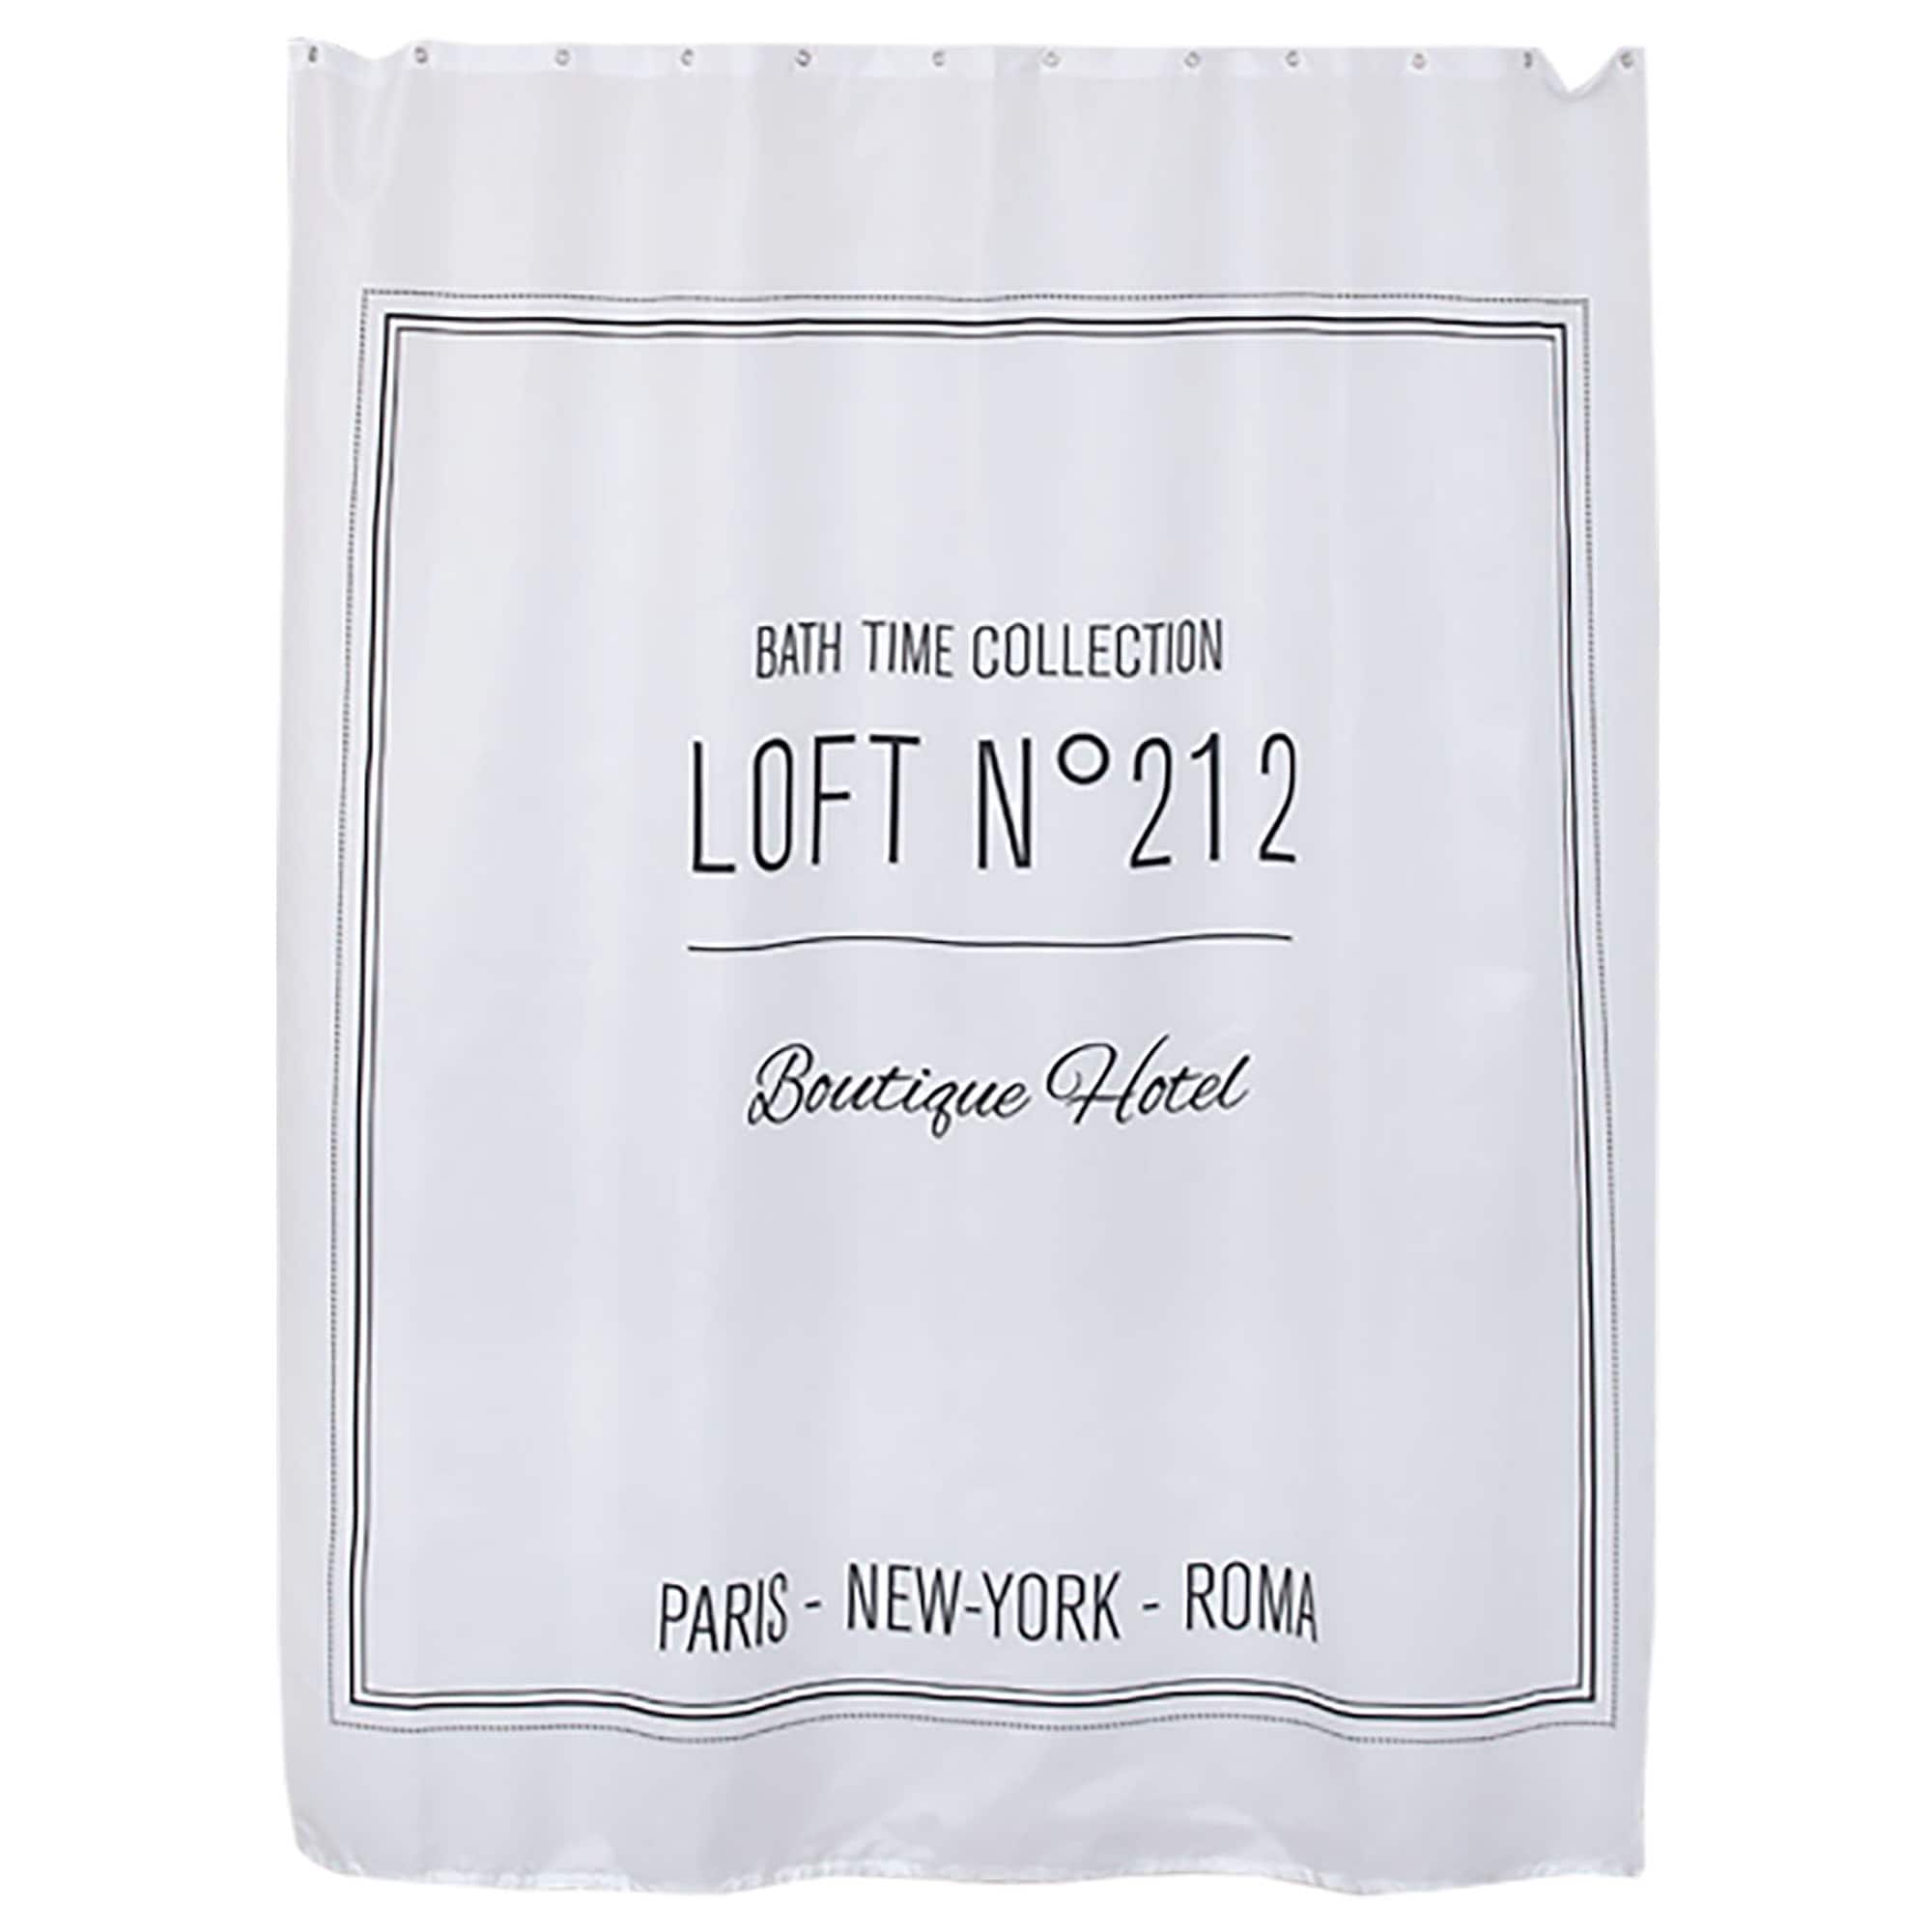 extra-long white shower curtain with black writing